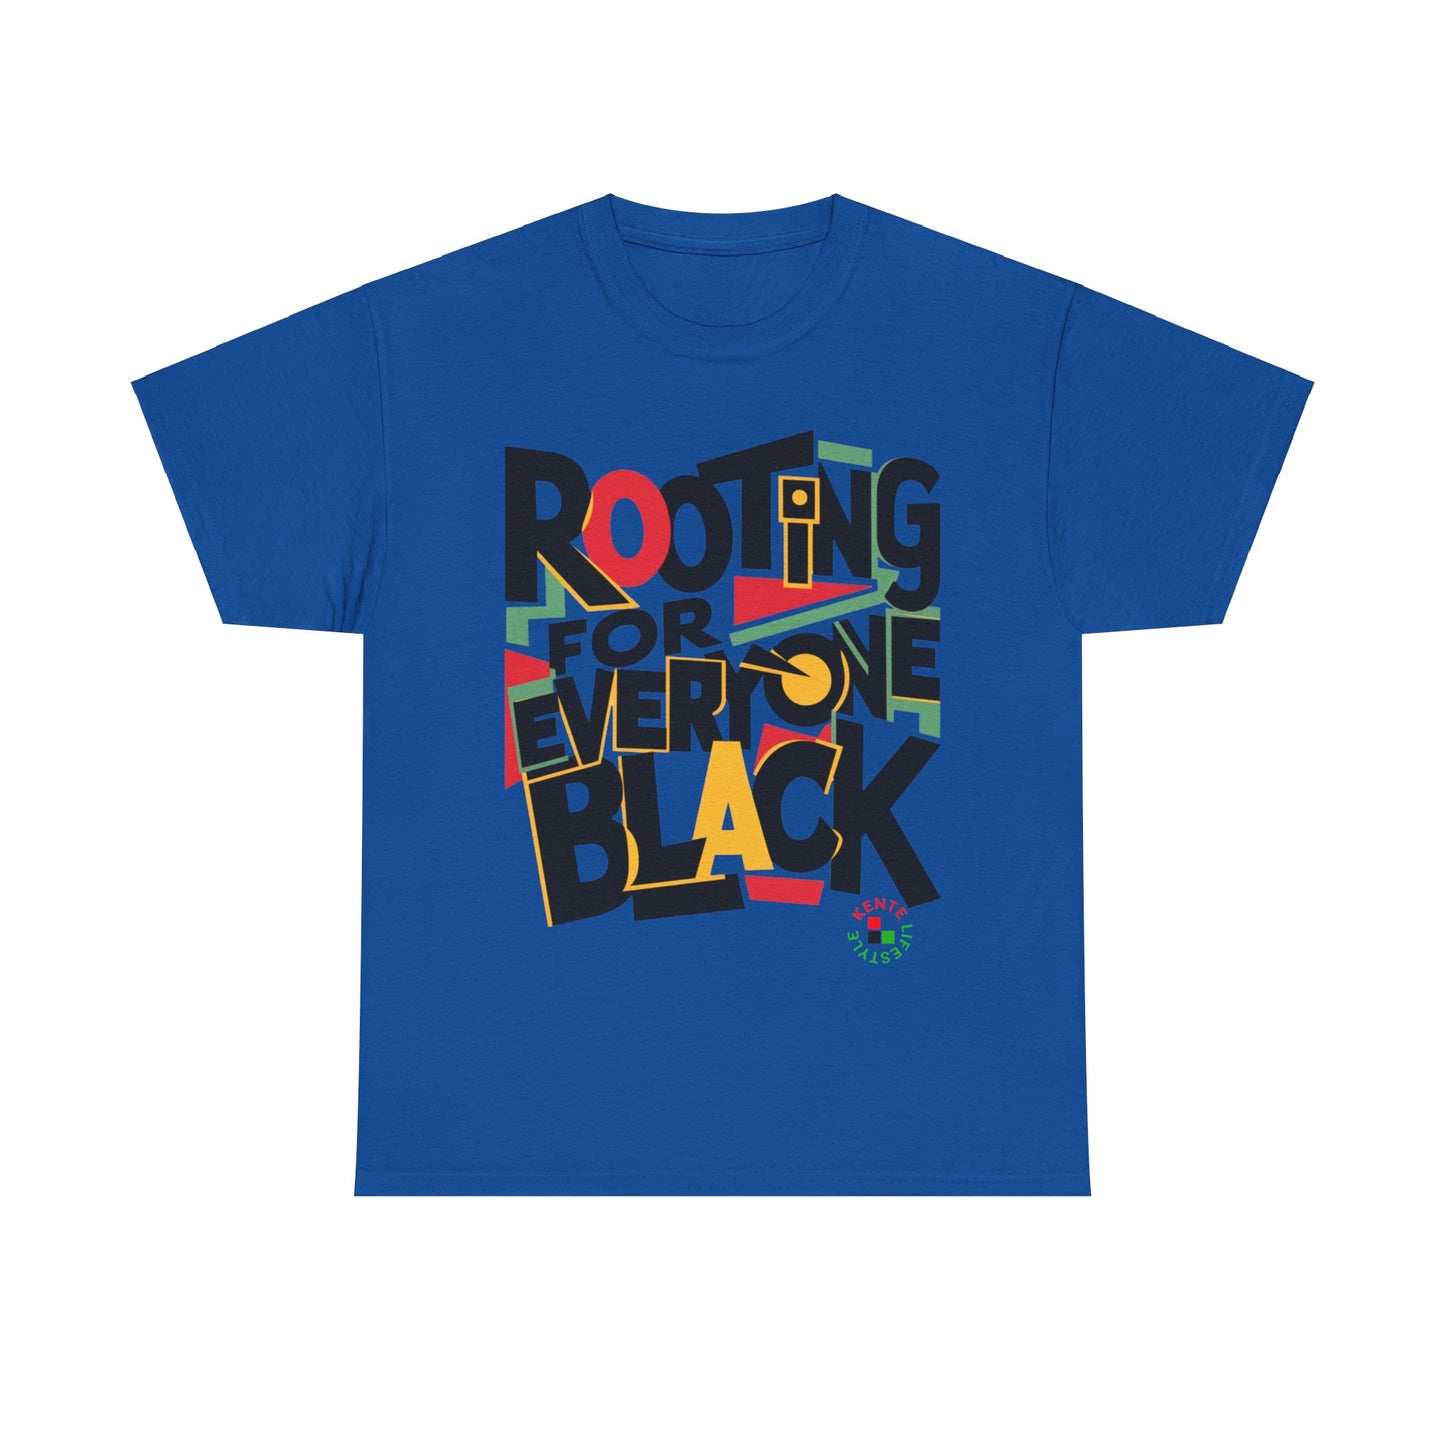 "Rooting For Everyone Black" -- T-shirt